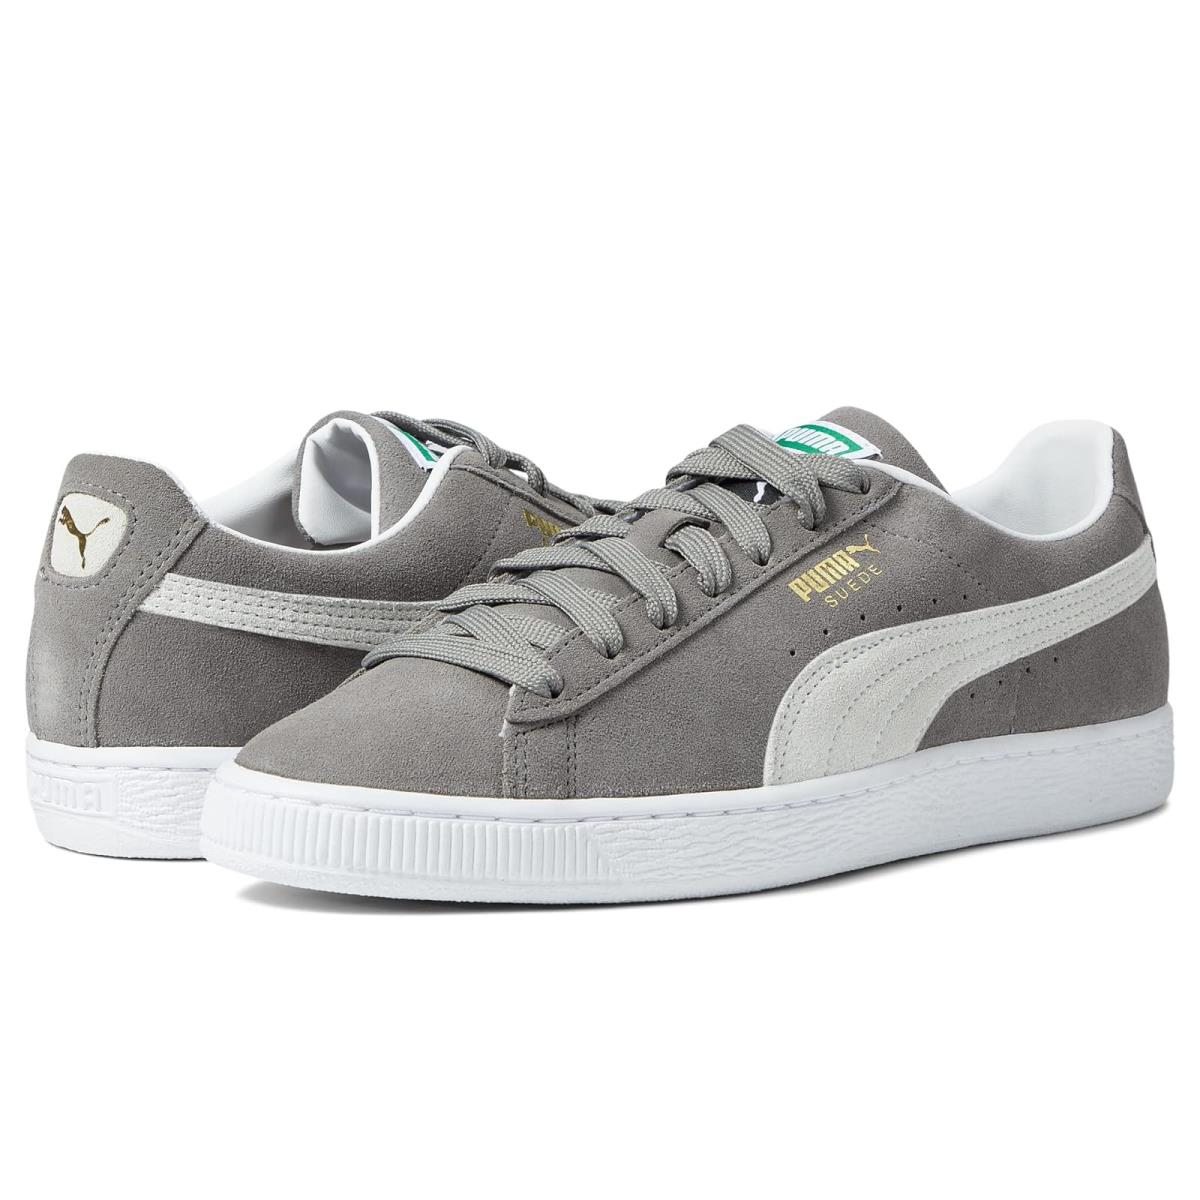 Man`s Sneakers Athletic Shoes Puma Suede Classic Xxi Steel Gray/Puma White